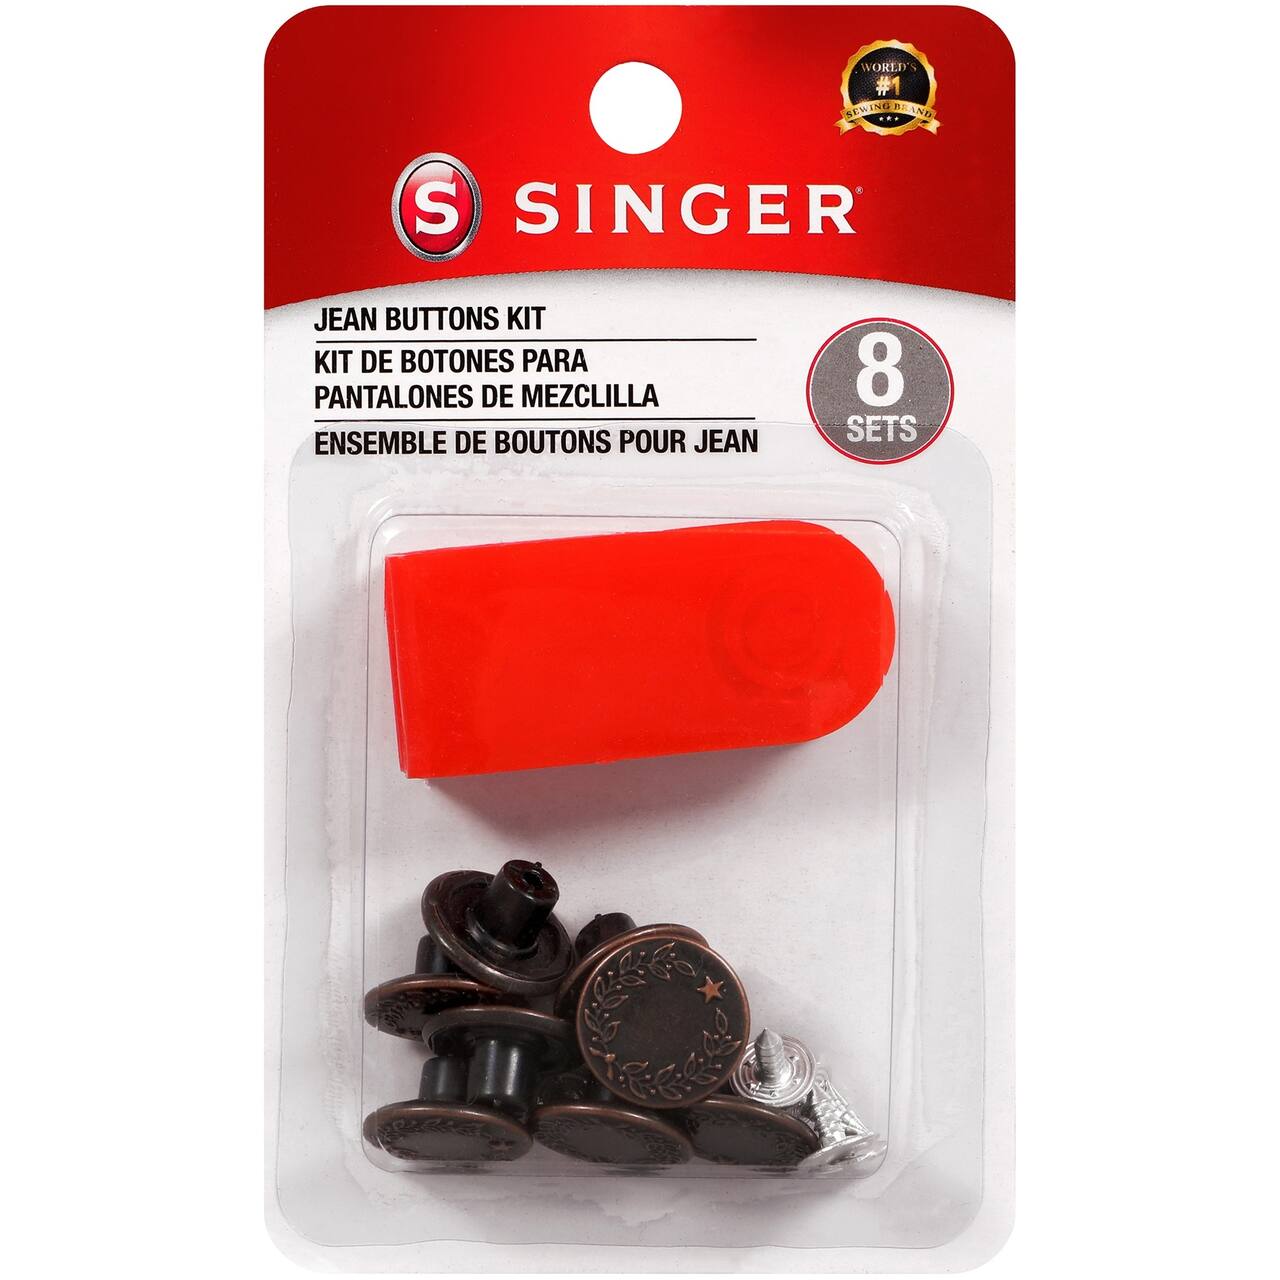 SINGER® No Sew Jean Buttons Kit with Tool, 8 Sets